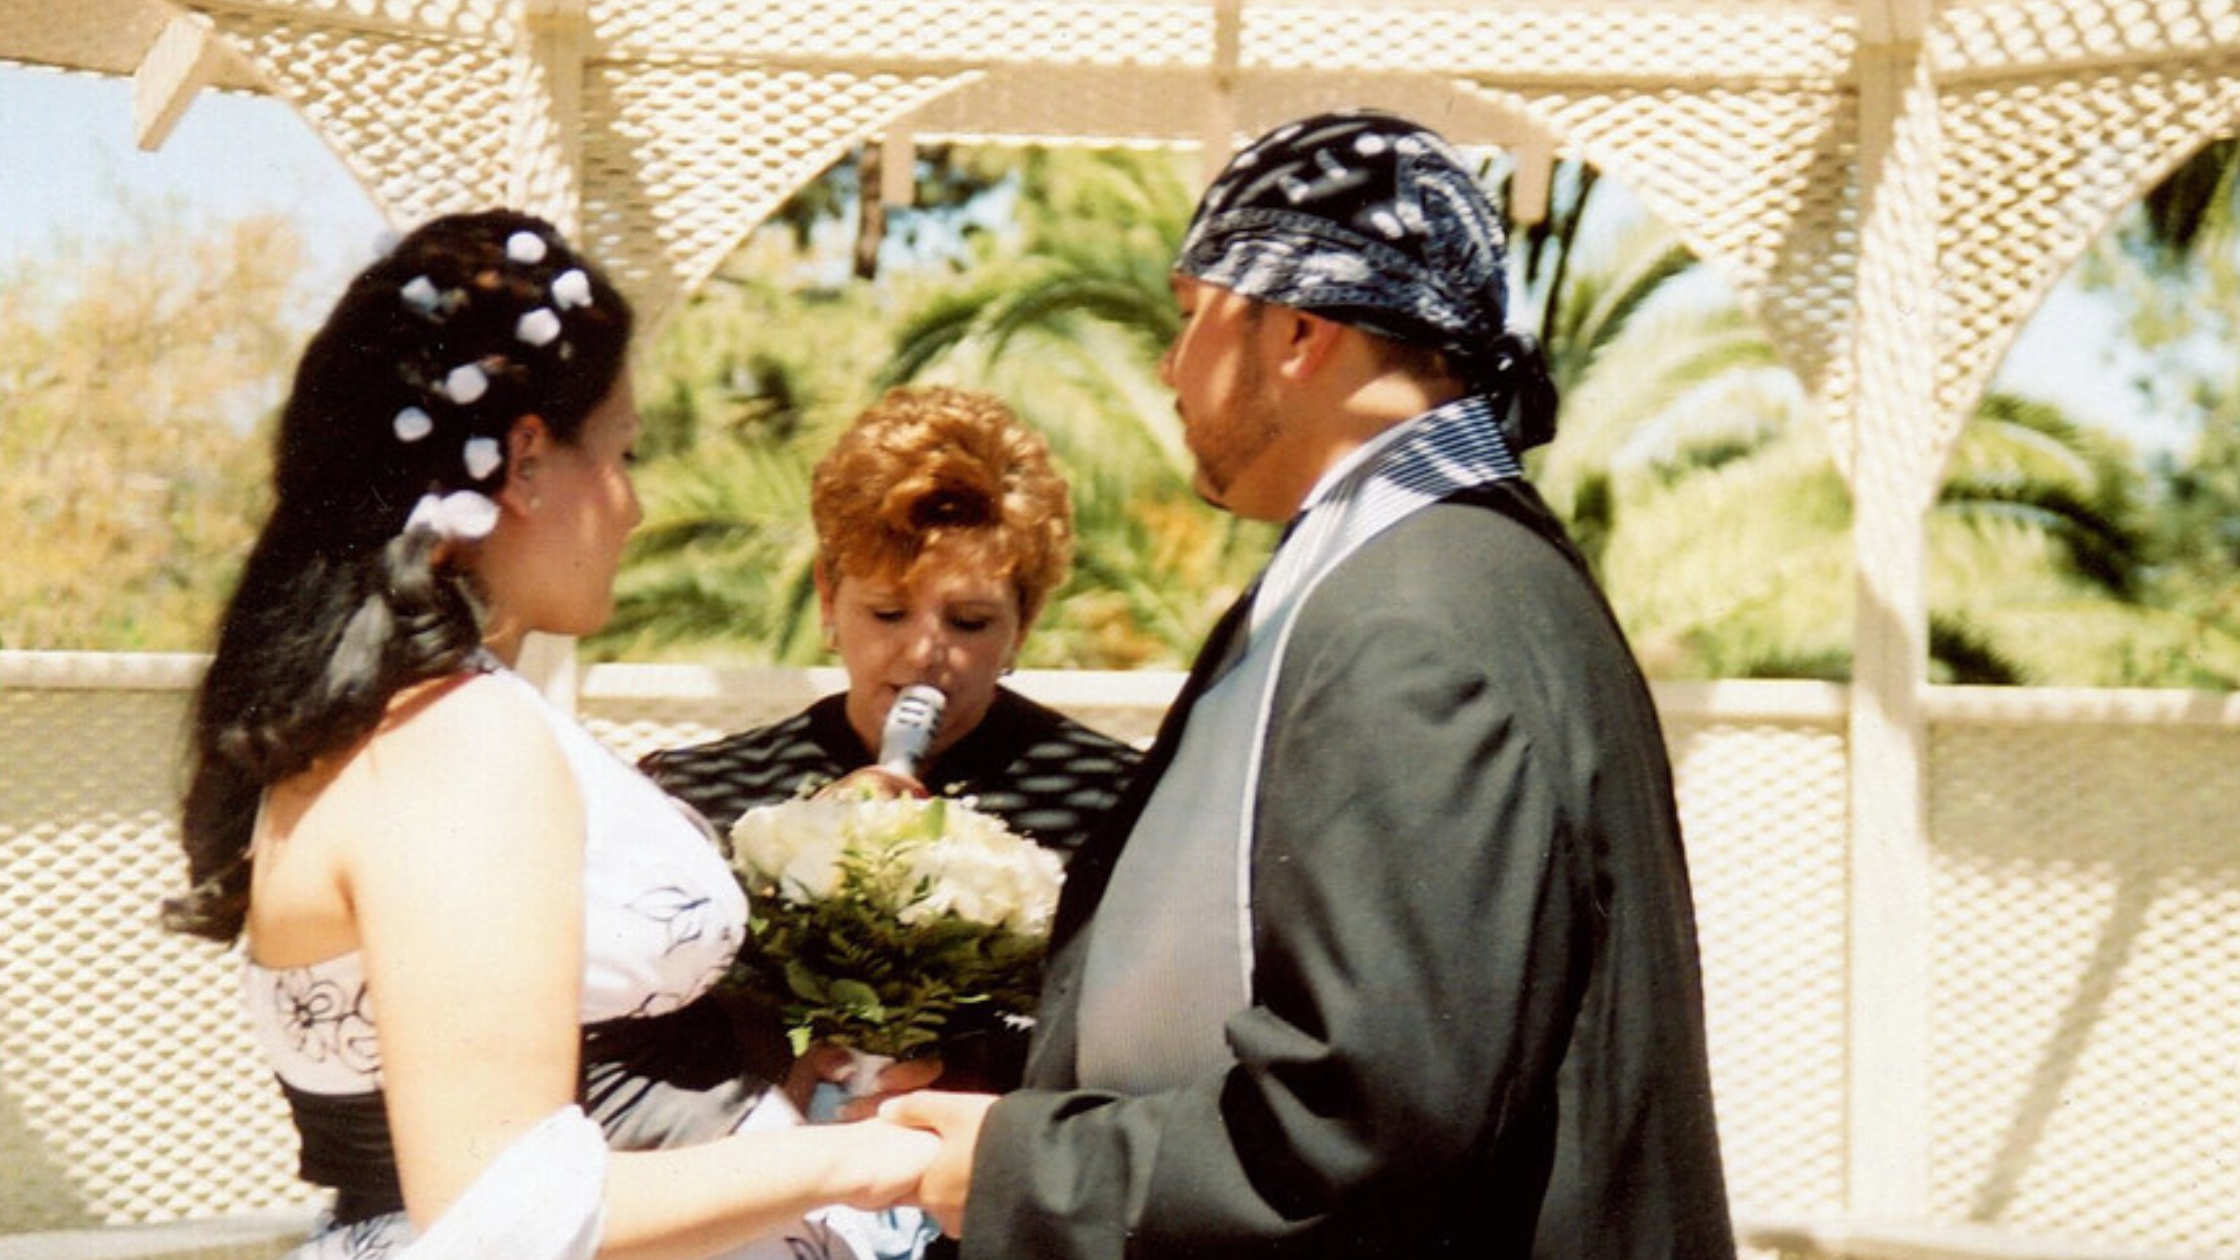 Los Angeles Wedding Officiant Agency